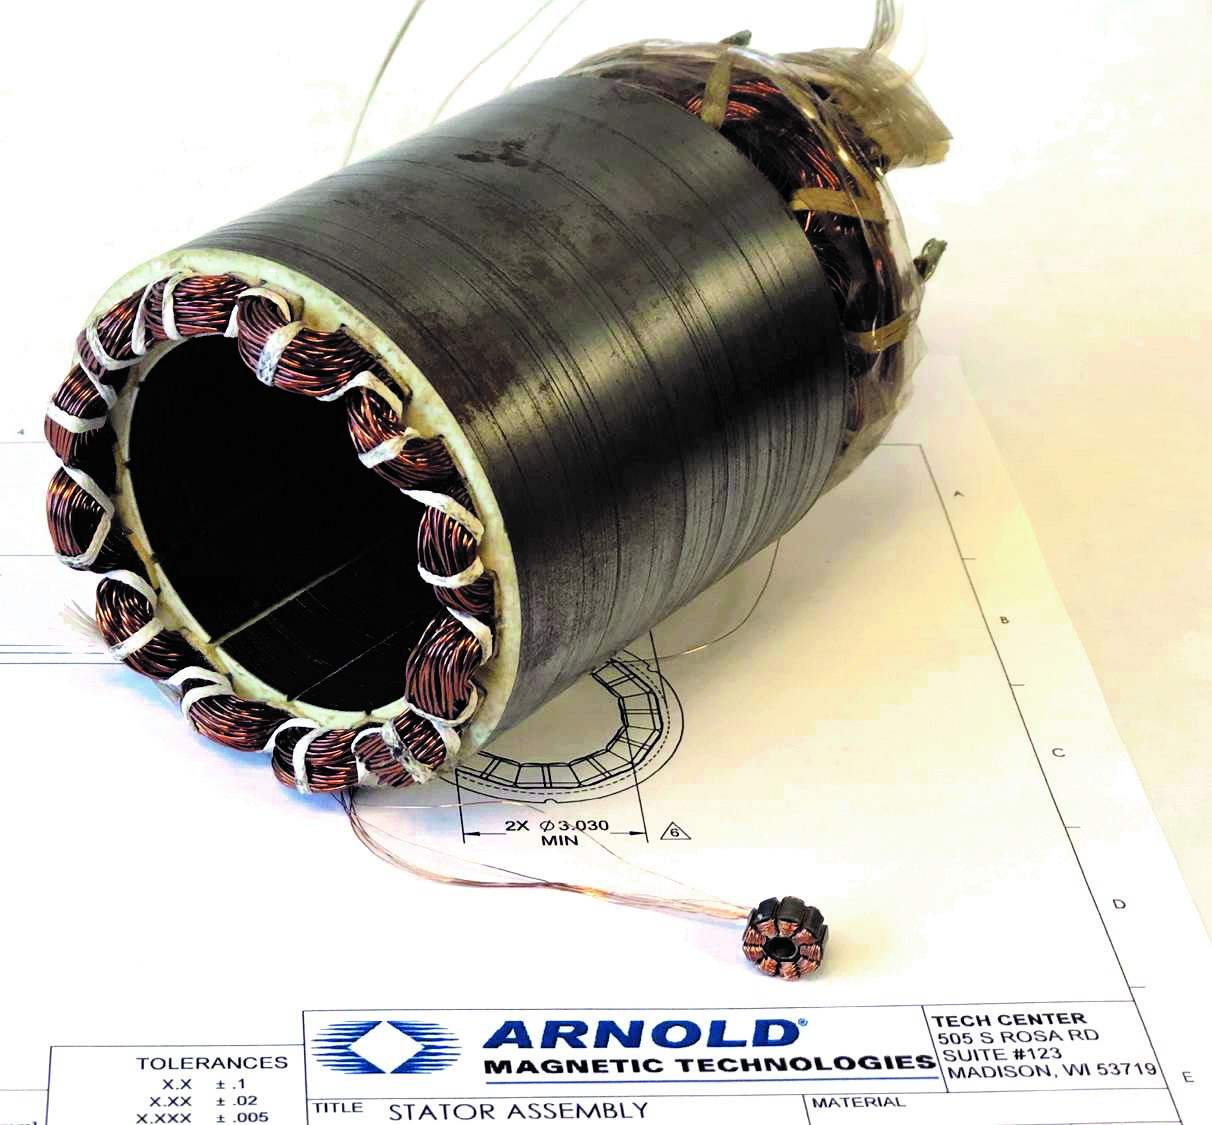 Figure 1. Arnold Magnetic Technologies has been in business for over 125 years and stands ready to enhance customer electromagnetic manufacturing and development needs. Source: Arnold Magnetic Technologies